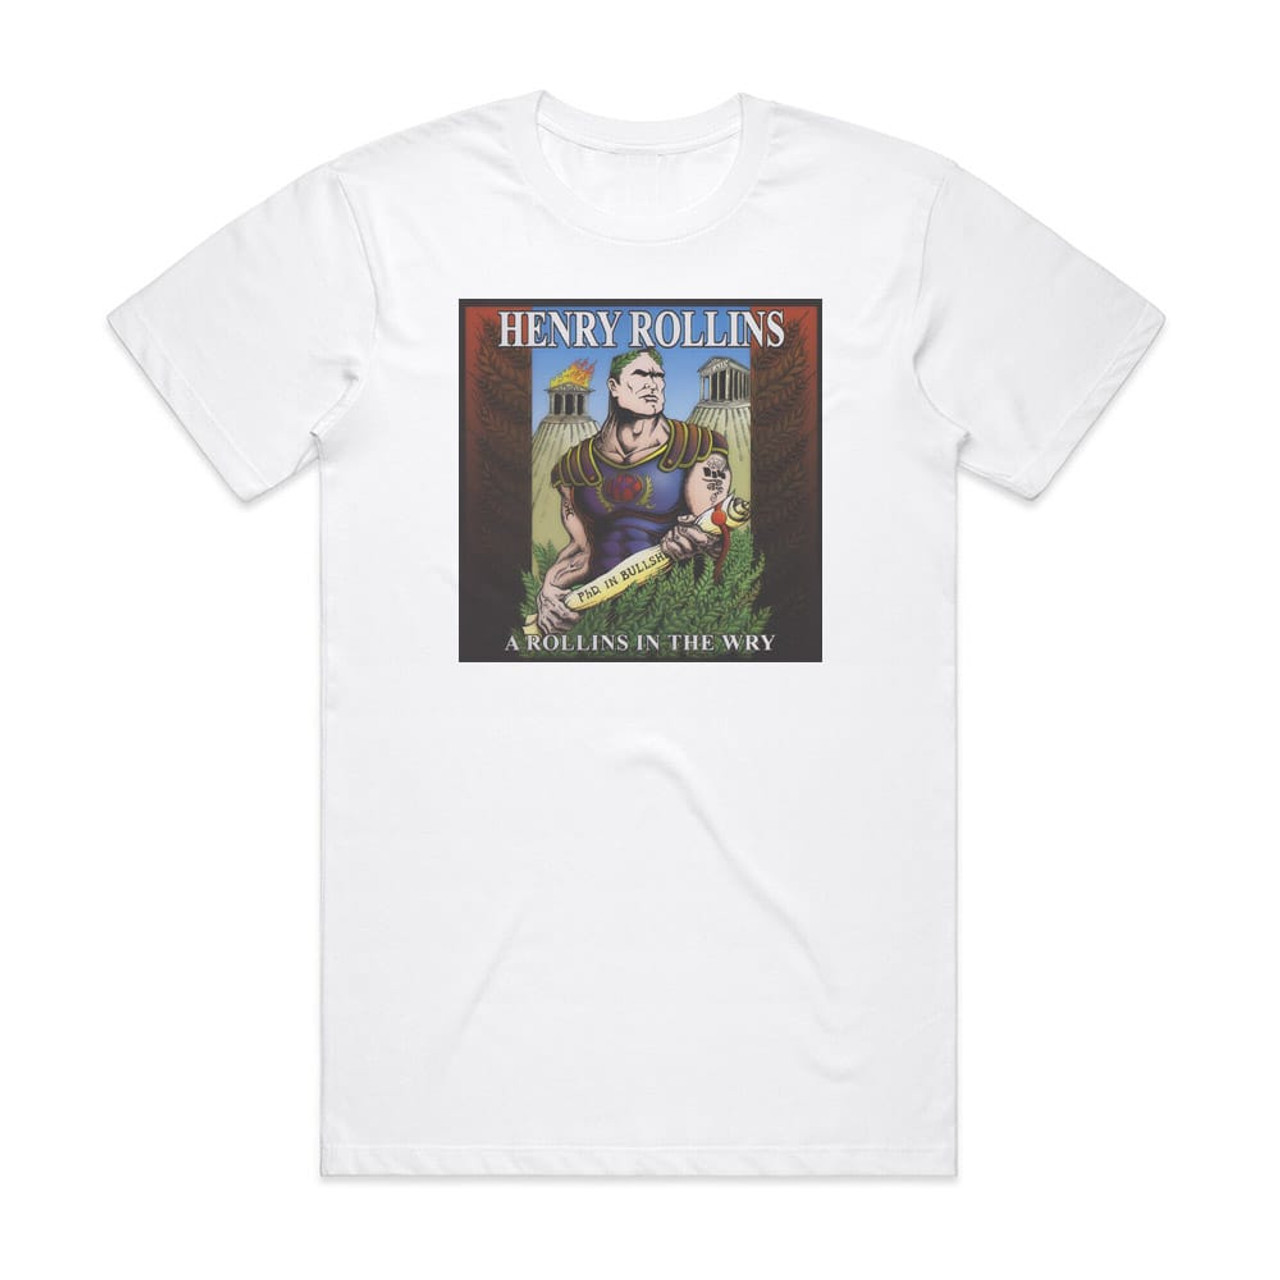 badminton miles Pigment Henry Rollins A Rollins In The Wry Album Cover T-Shirt White